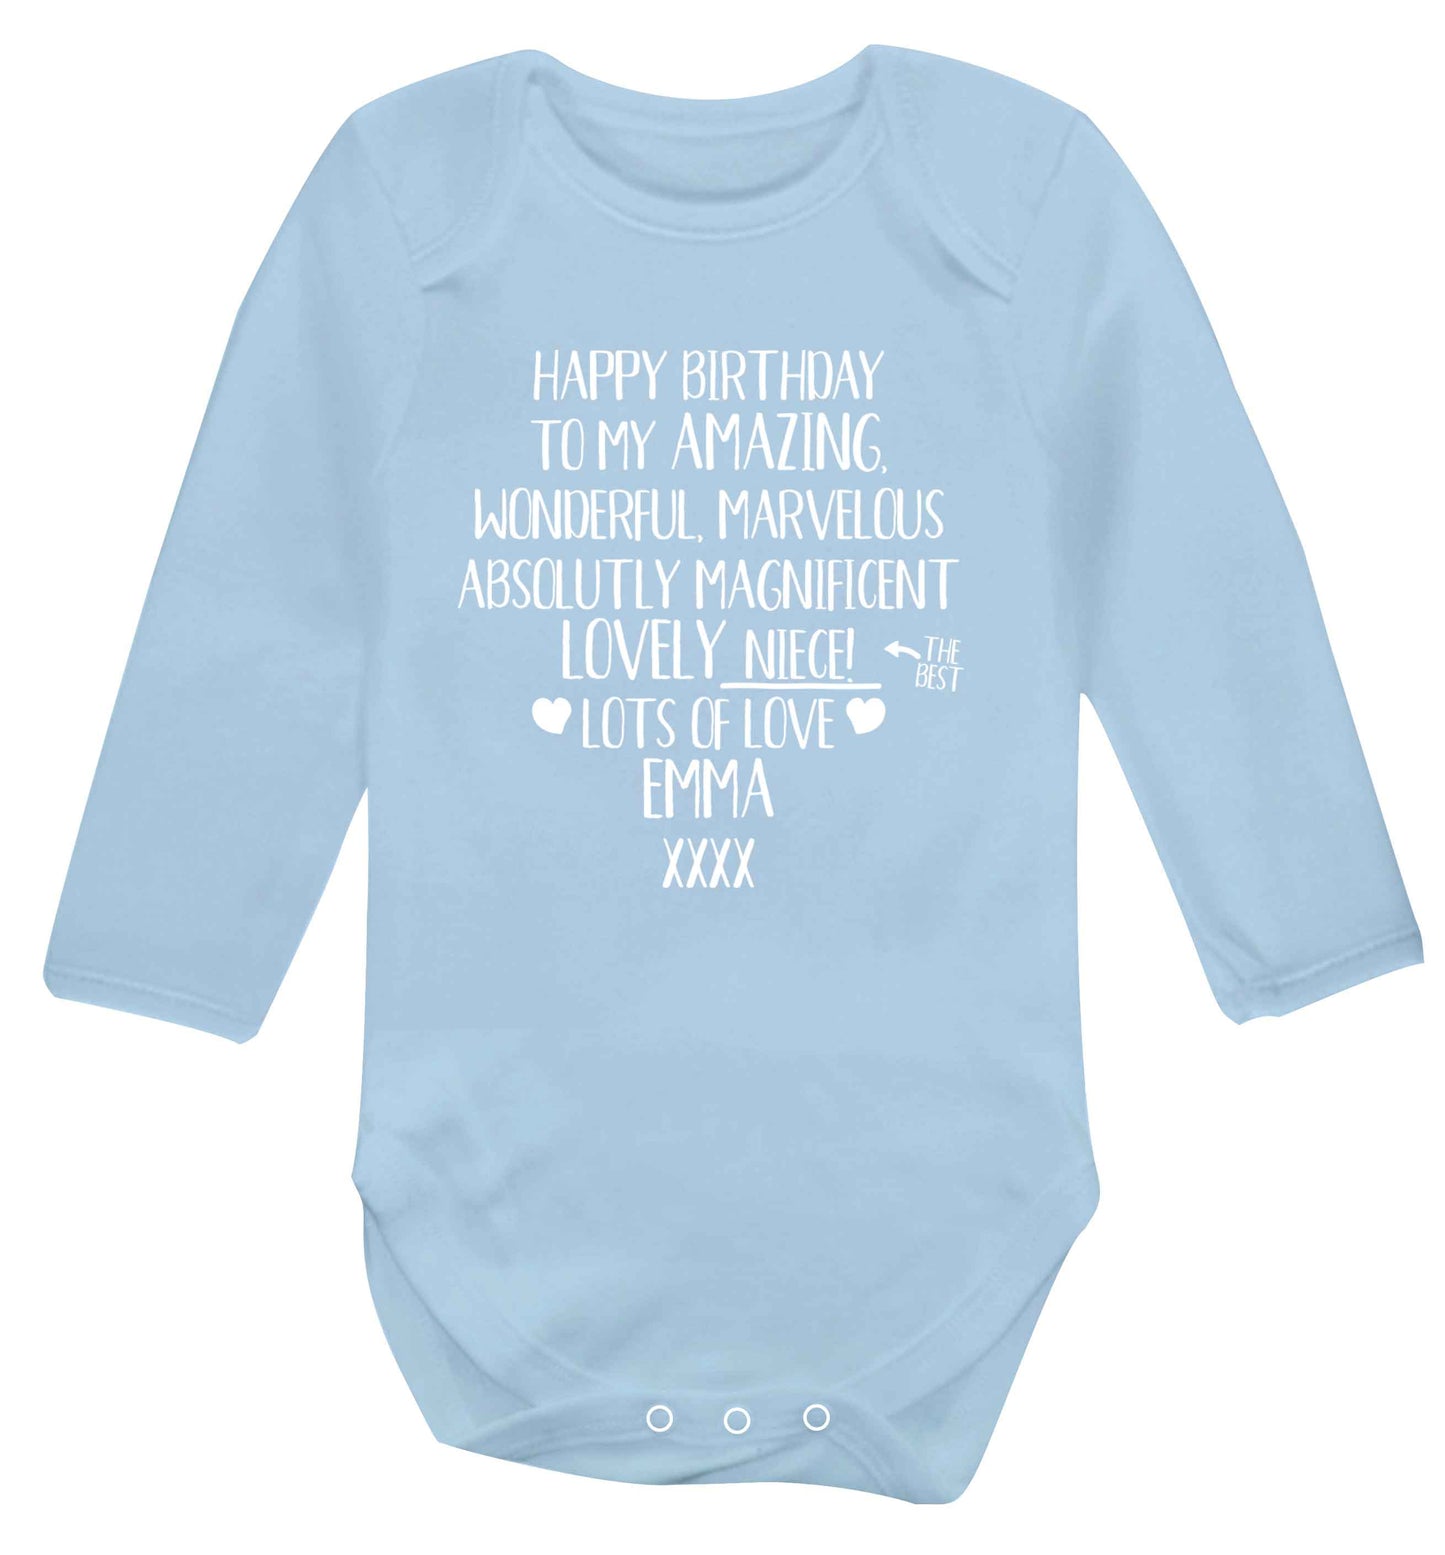 Personalised happy birthday to my amazing, wonderful, lovely niece Baby Vest long sleeved pale blue 6-12 months